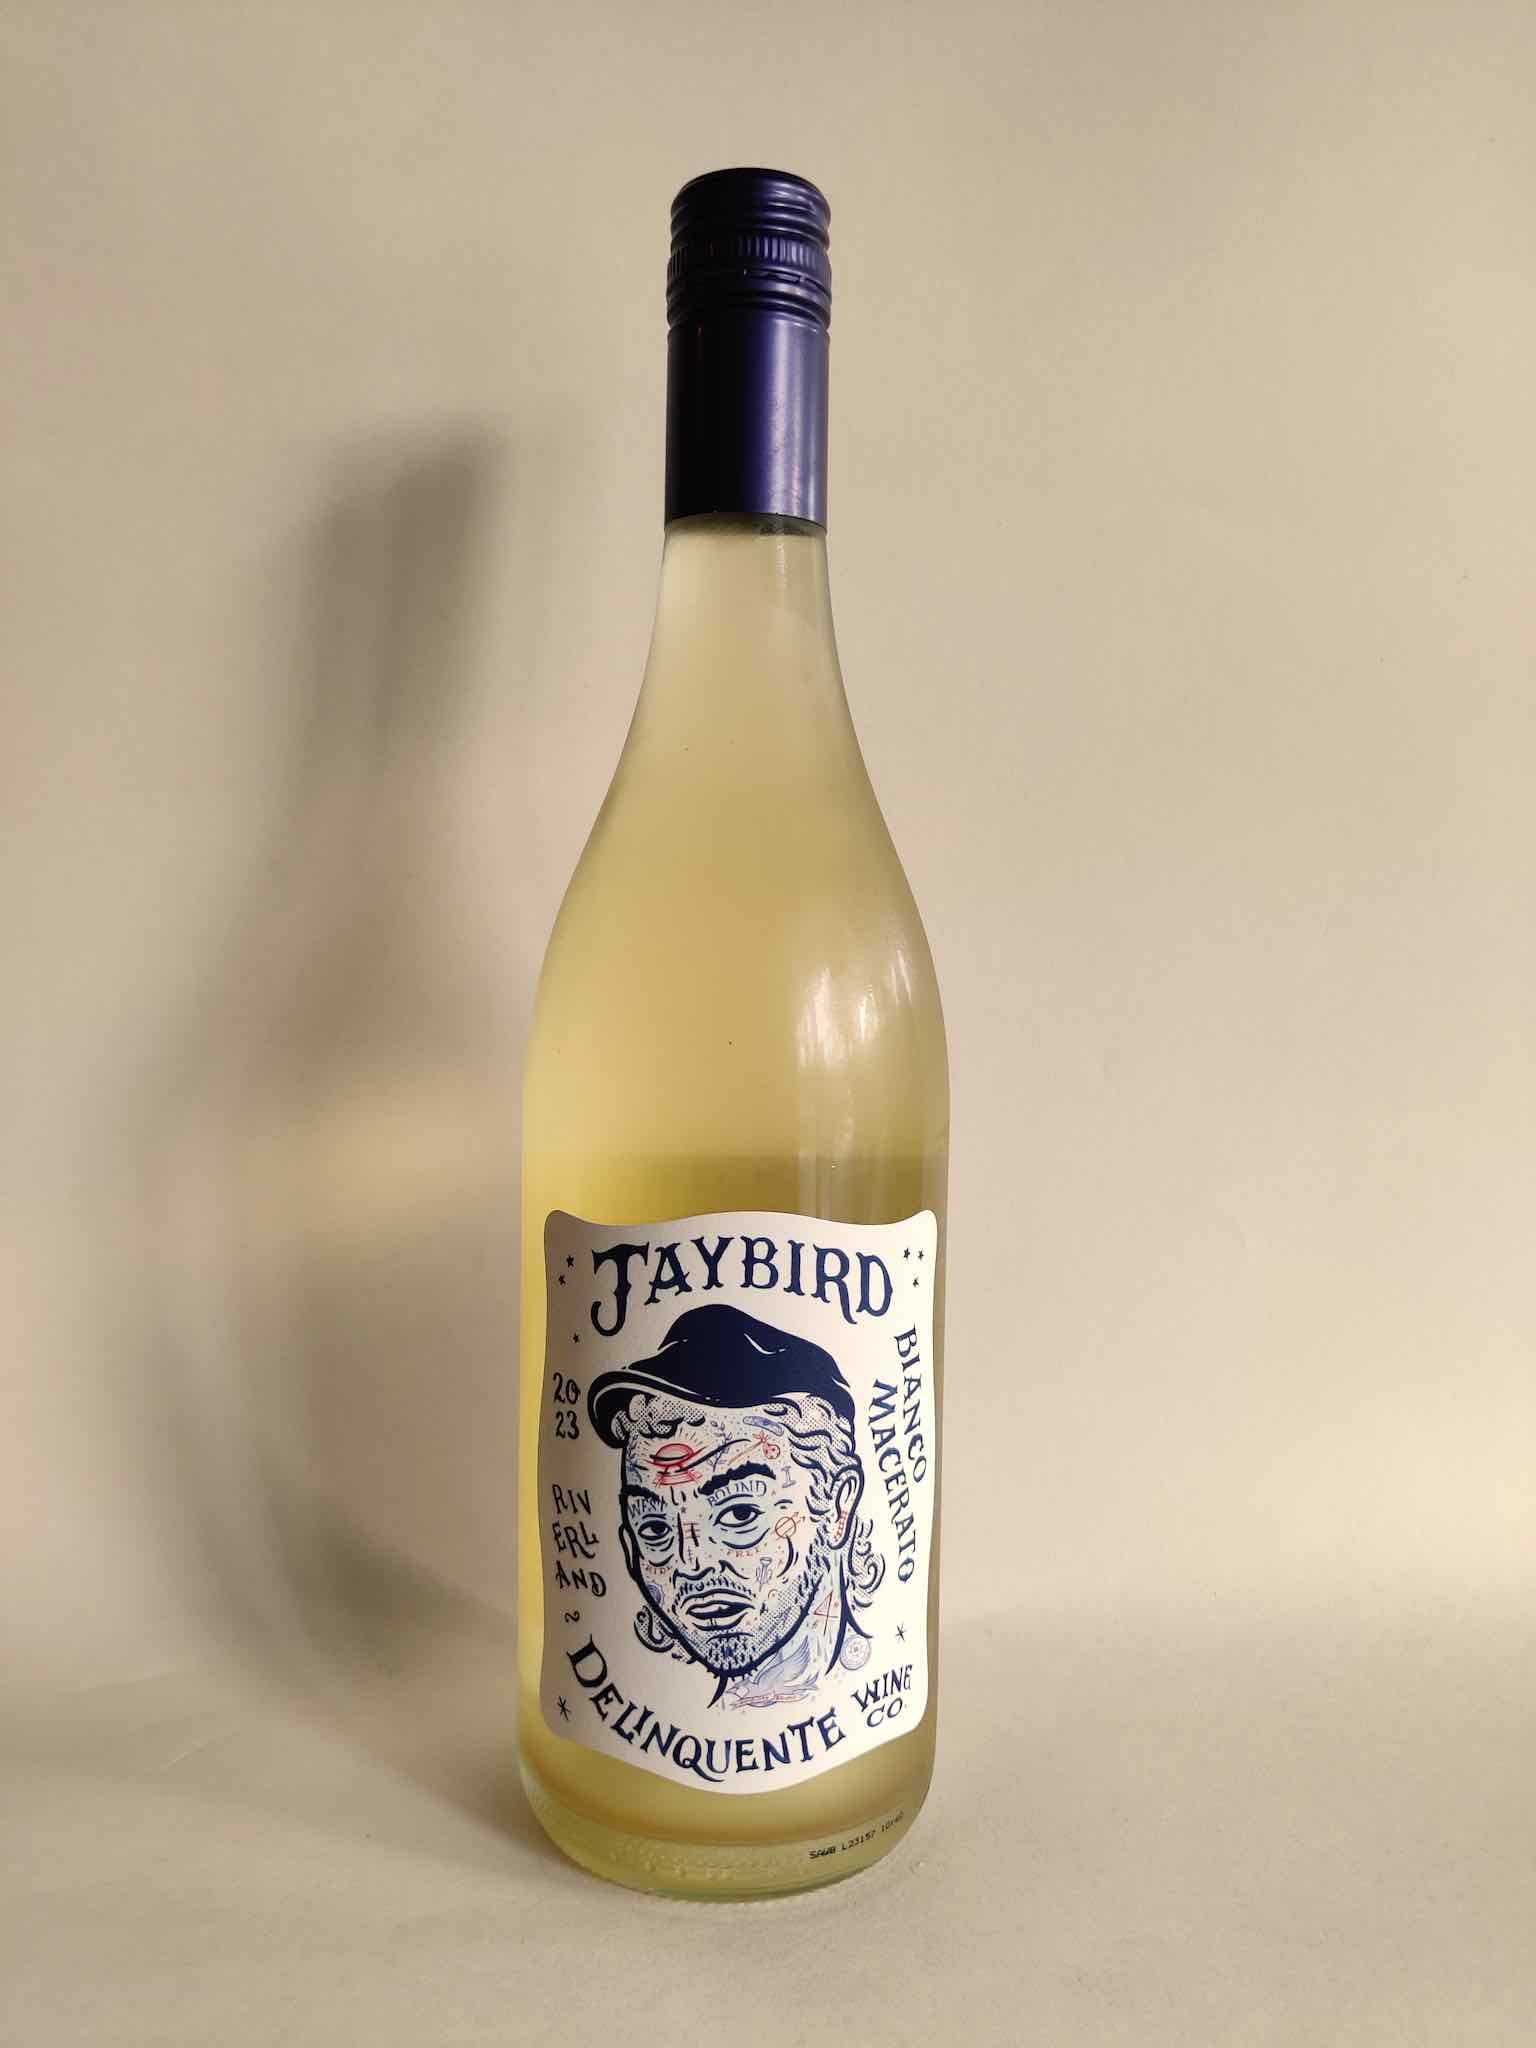 A 750ml bottle of Delinquente Jaybird Bianco Macerato skin contact white wine from Riverland, South Australia.